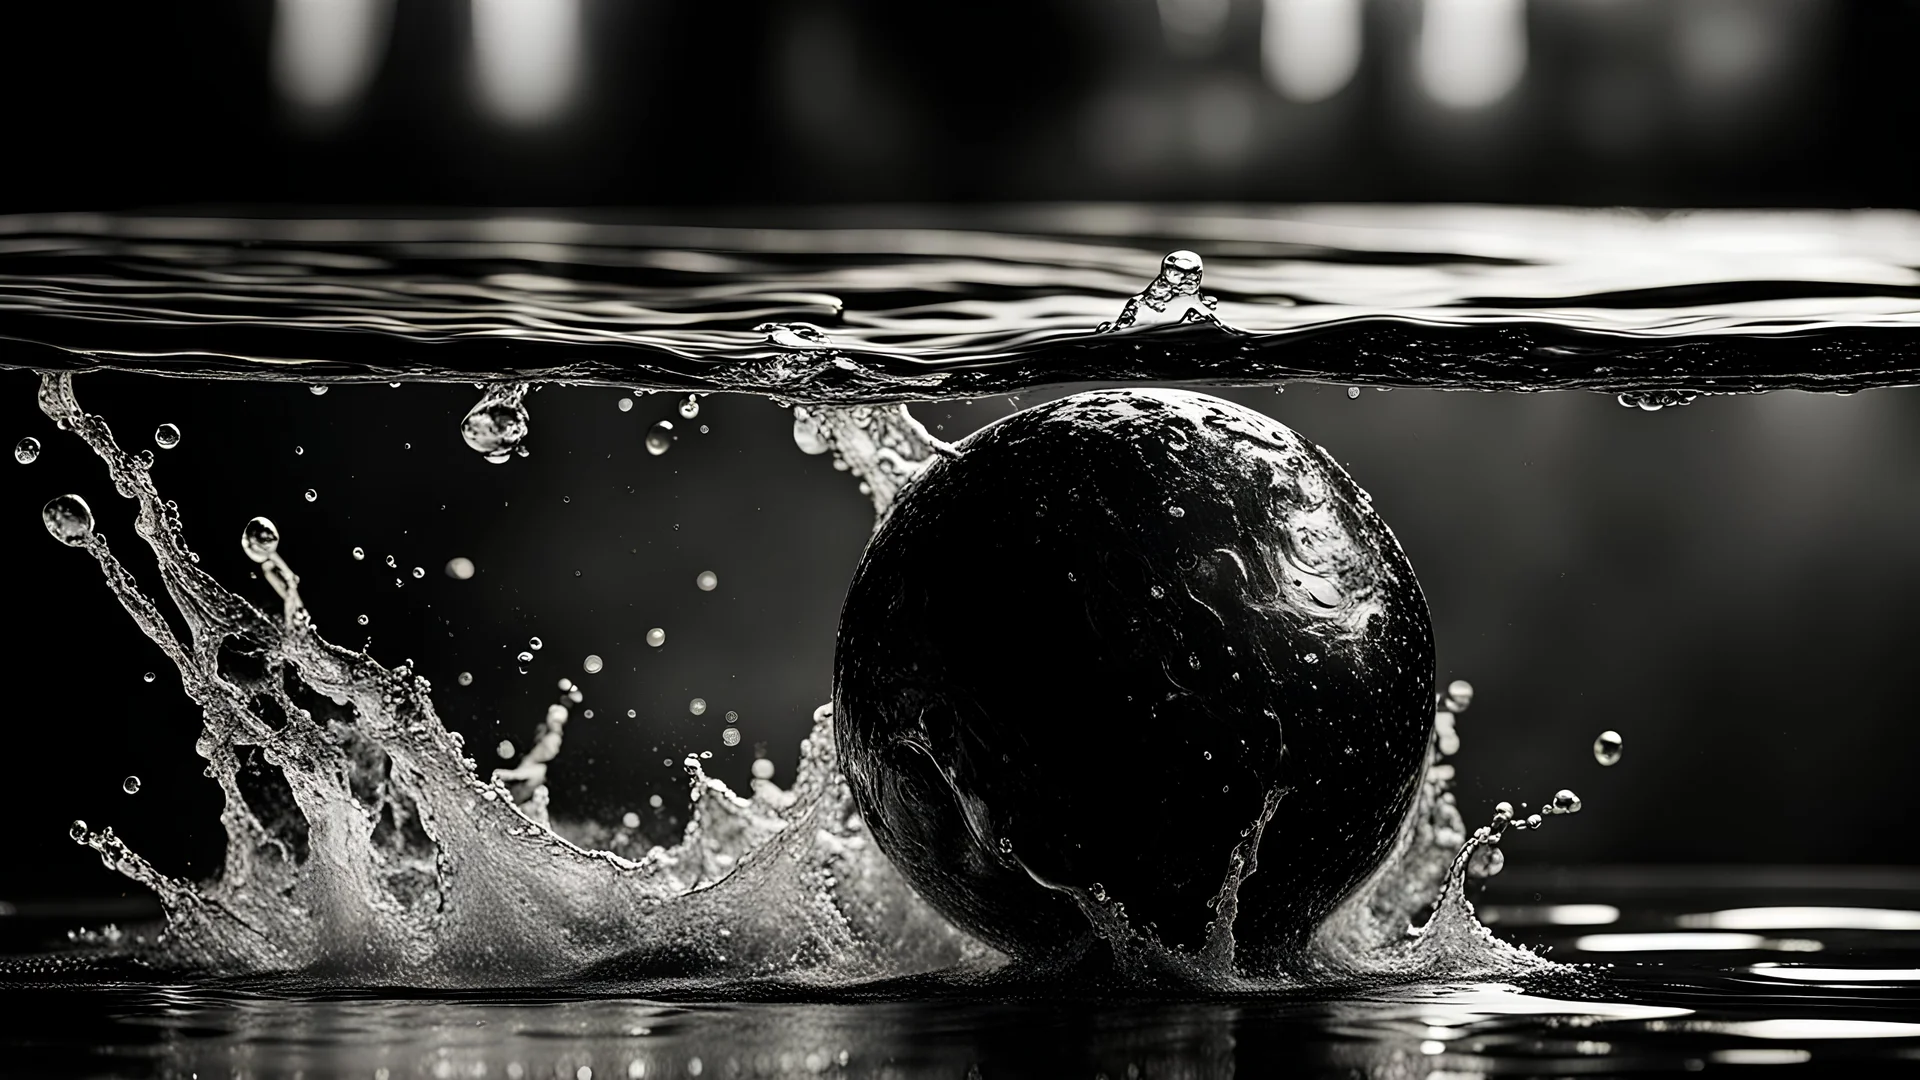 close up of ball plunging in water, splashing, hyper realistic, big contrast , black and white